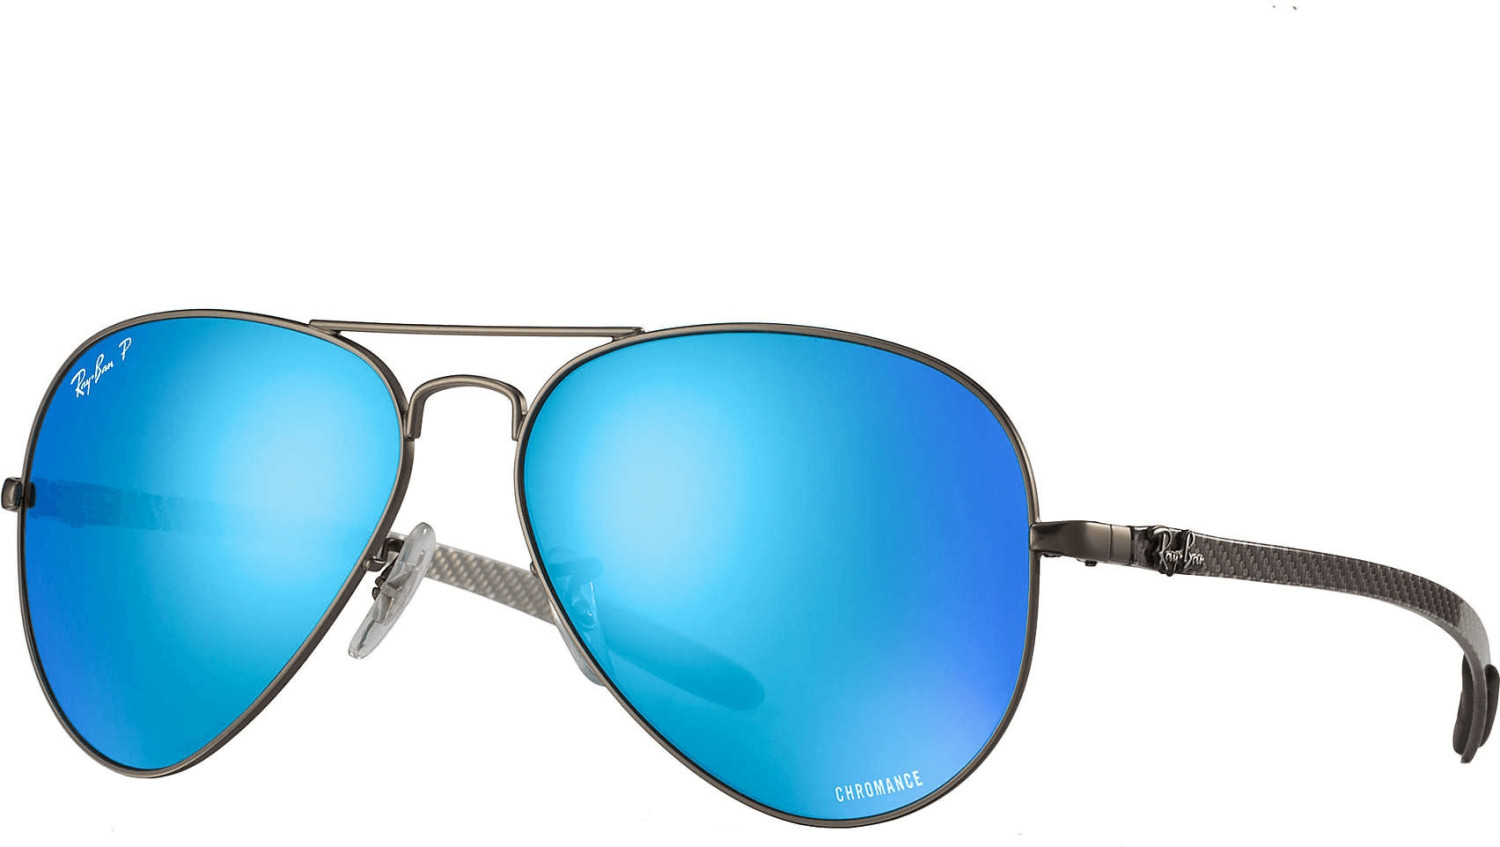 Buy Ray Ban Rb17ch Chromance From 127 70 Today Best Deals On Idealo Co Uk